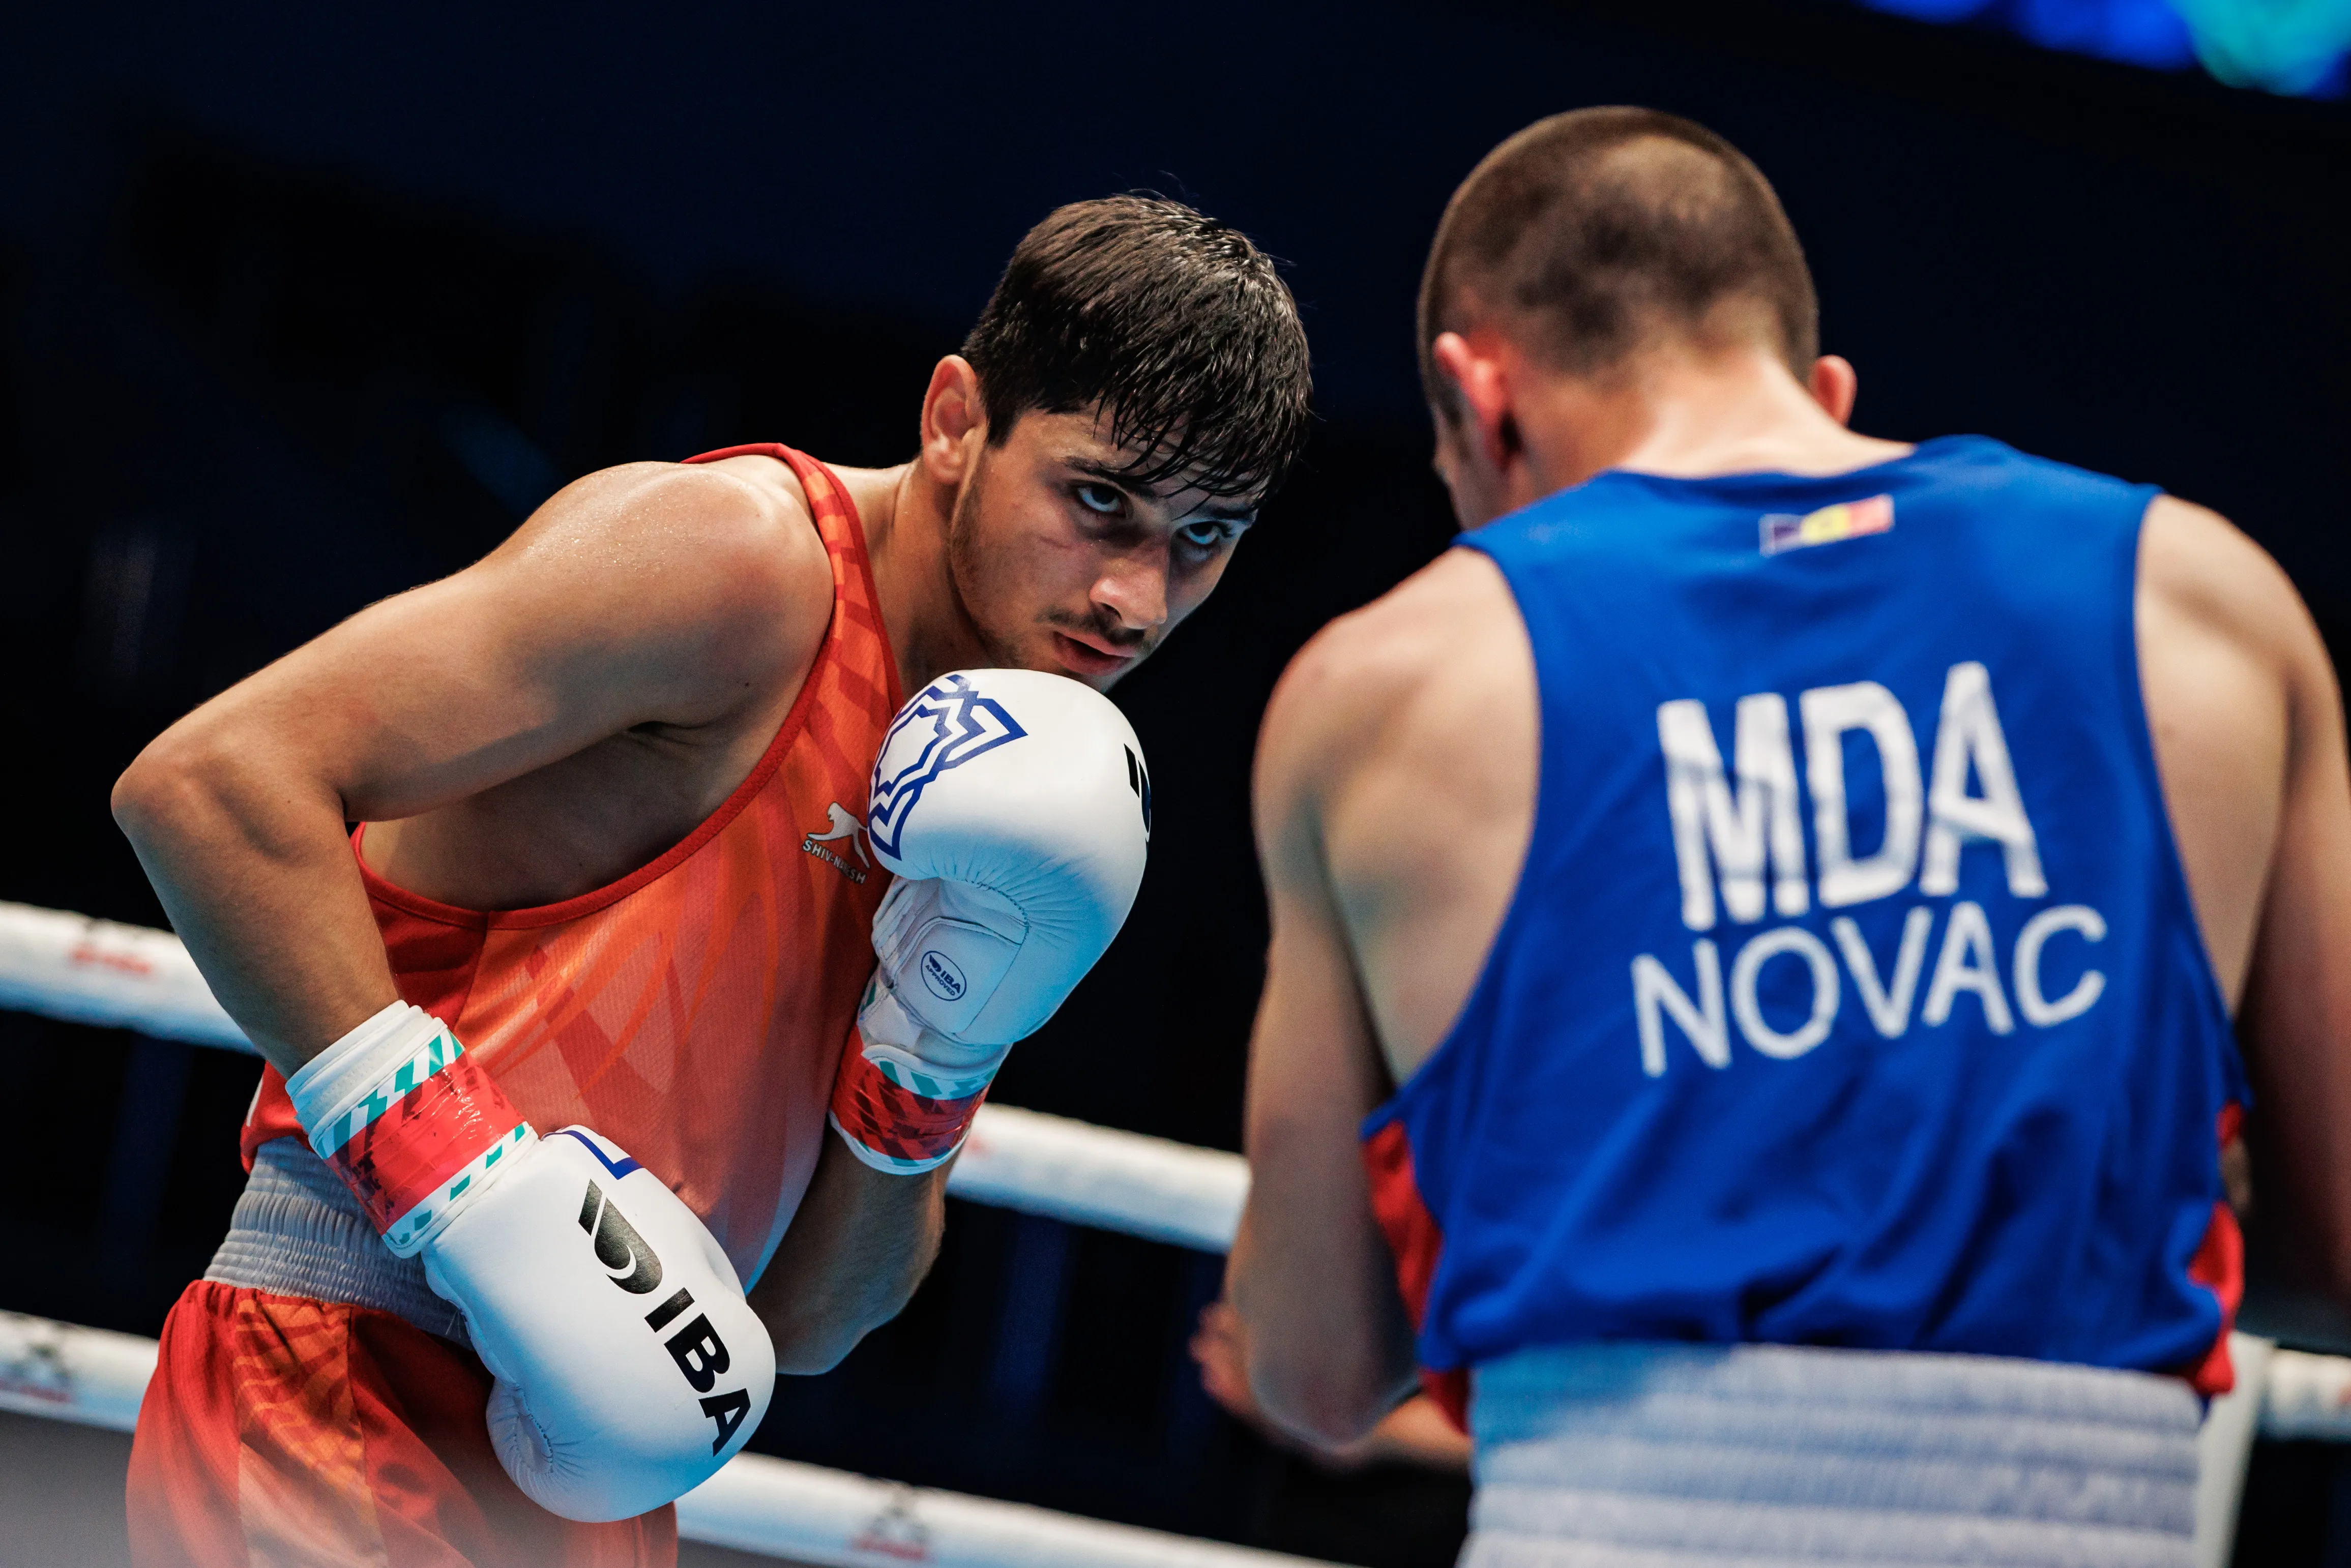 Sachin Siwach moves into pre-quarters at IBA Men’s World Boxing Championships